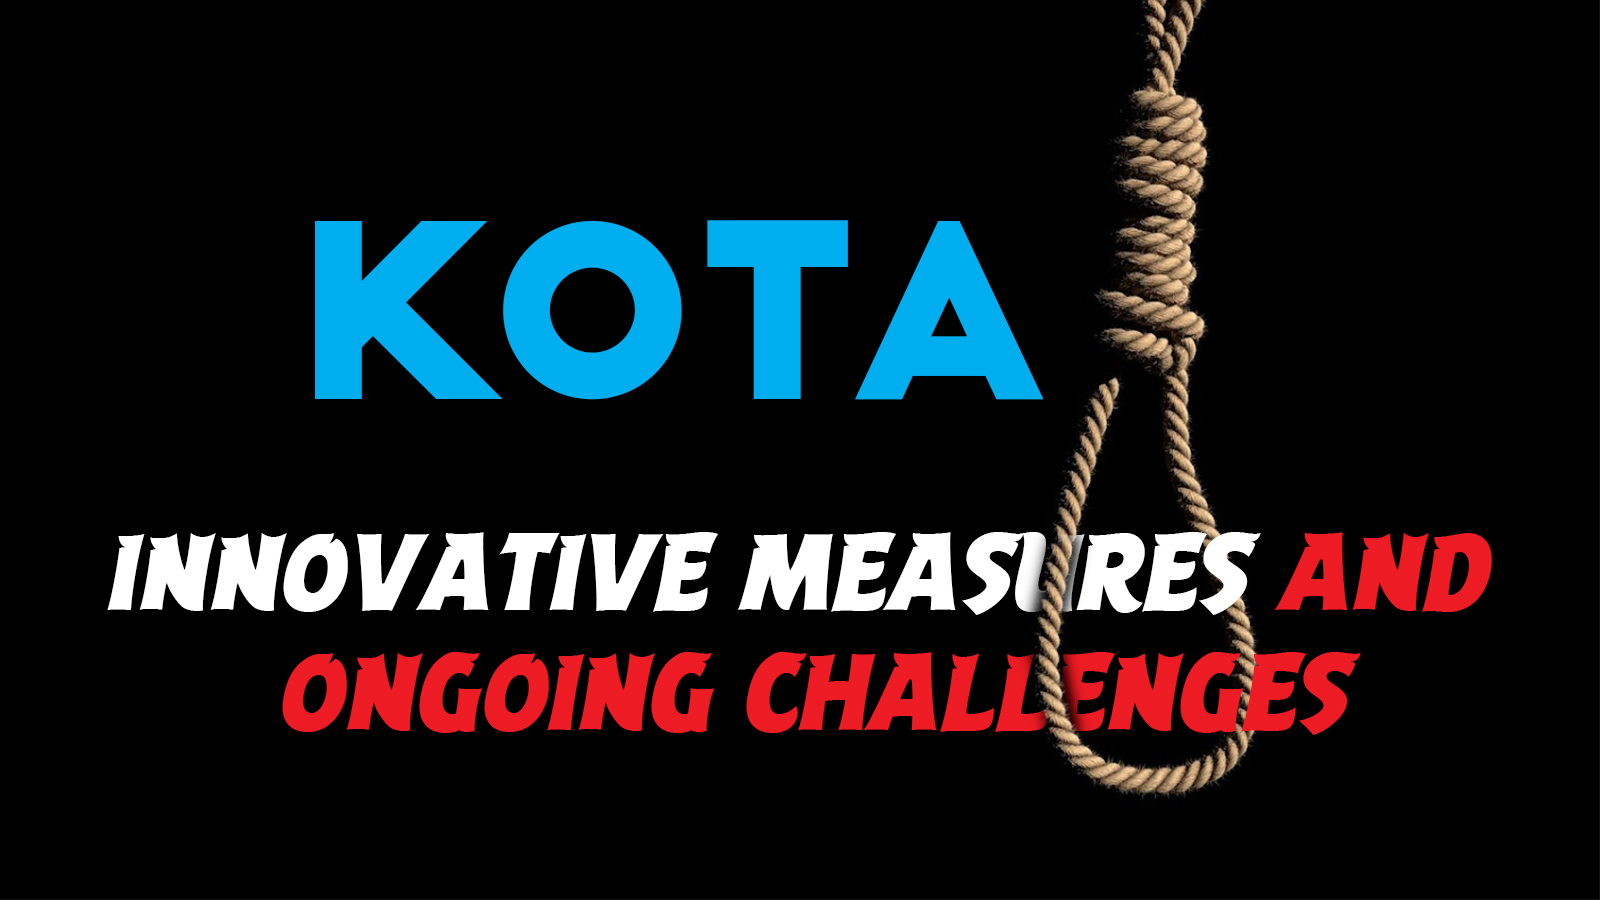 Kota’s Rising Student Suicide Crisis: Innovative Measures and Ongoing Challenges